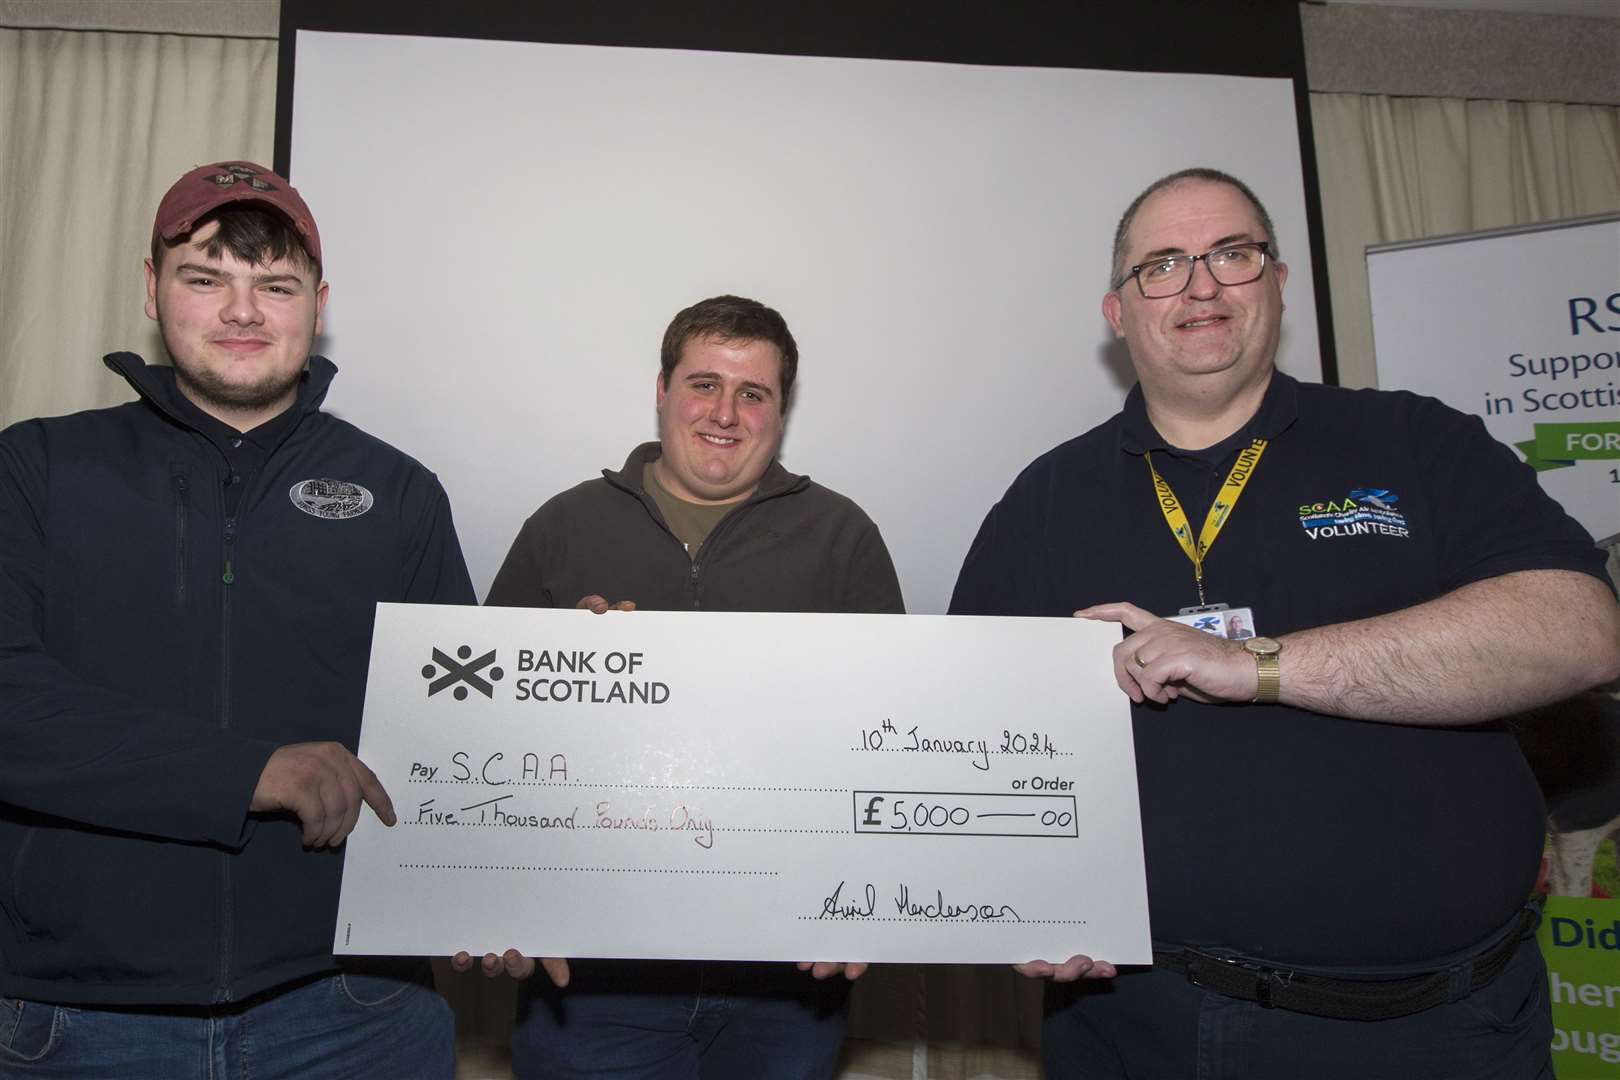 Matthew Murray (left), of Forss Young Farmers, and William Campbell, Bower, present a £5000 cheque to Gavin Geddes (right), a volunteer with Scotland's Charity Air Ambulance. Picture: Robert MacDonald / Northern Studios